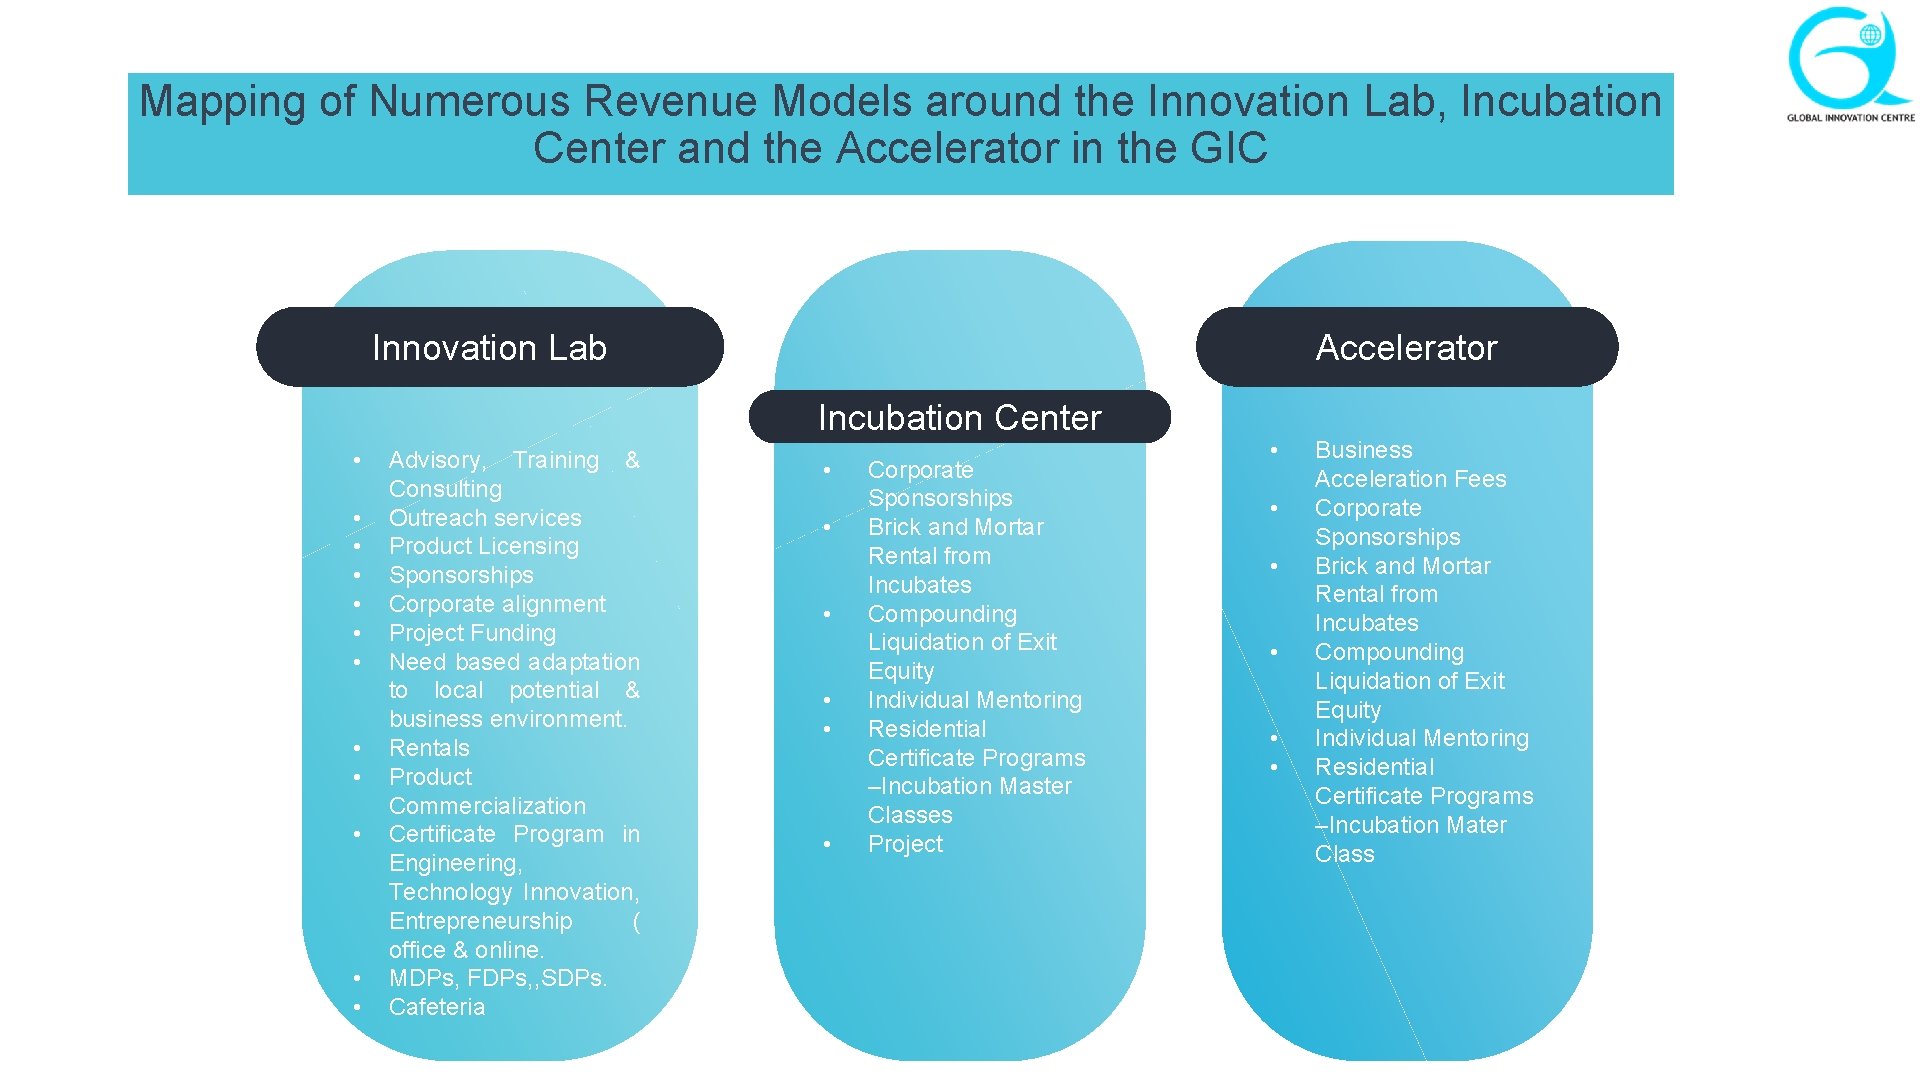 Mapping of Numerous Revenue Models around the Innovation Lab, Incubation Center and the Accelerator